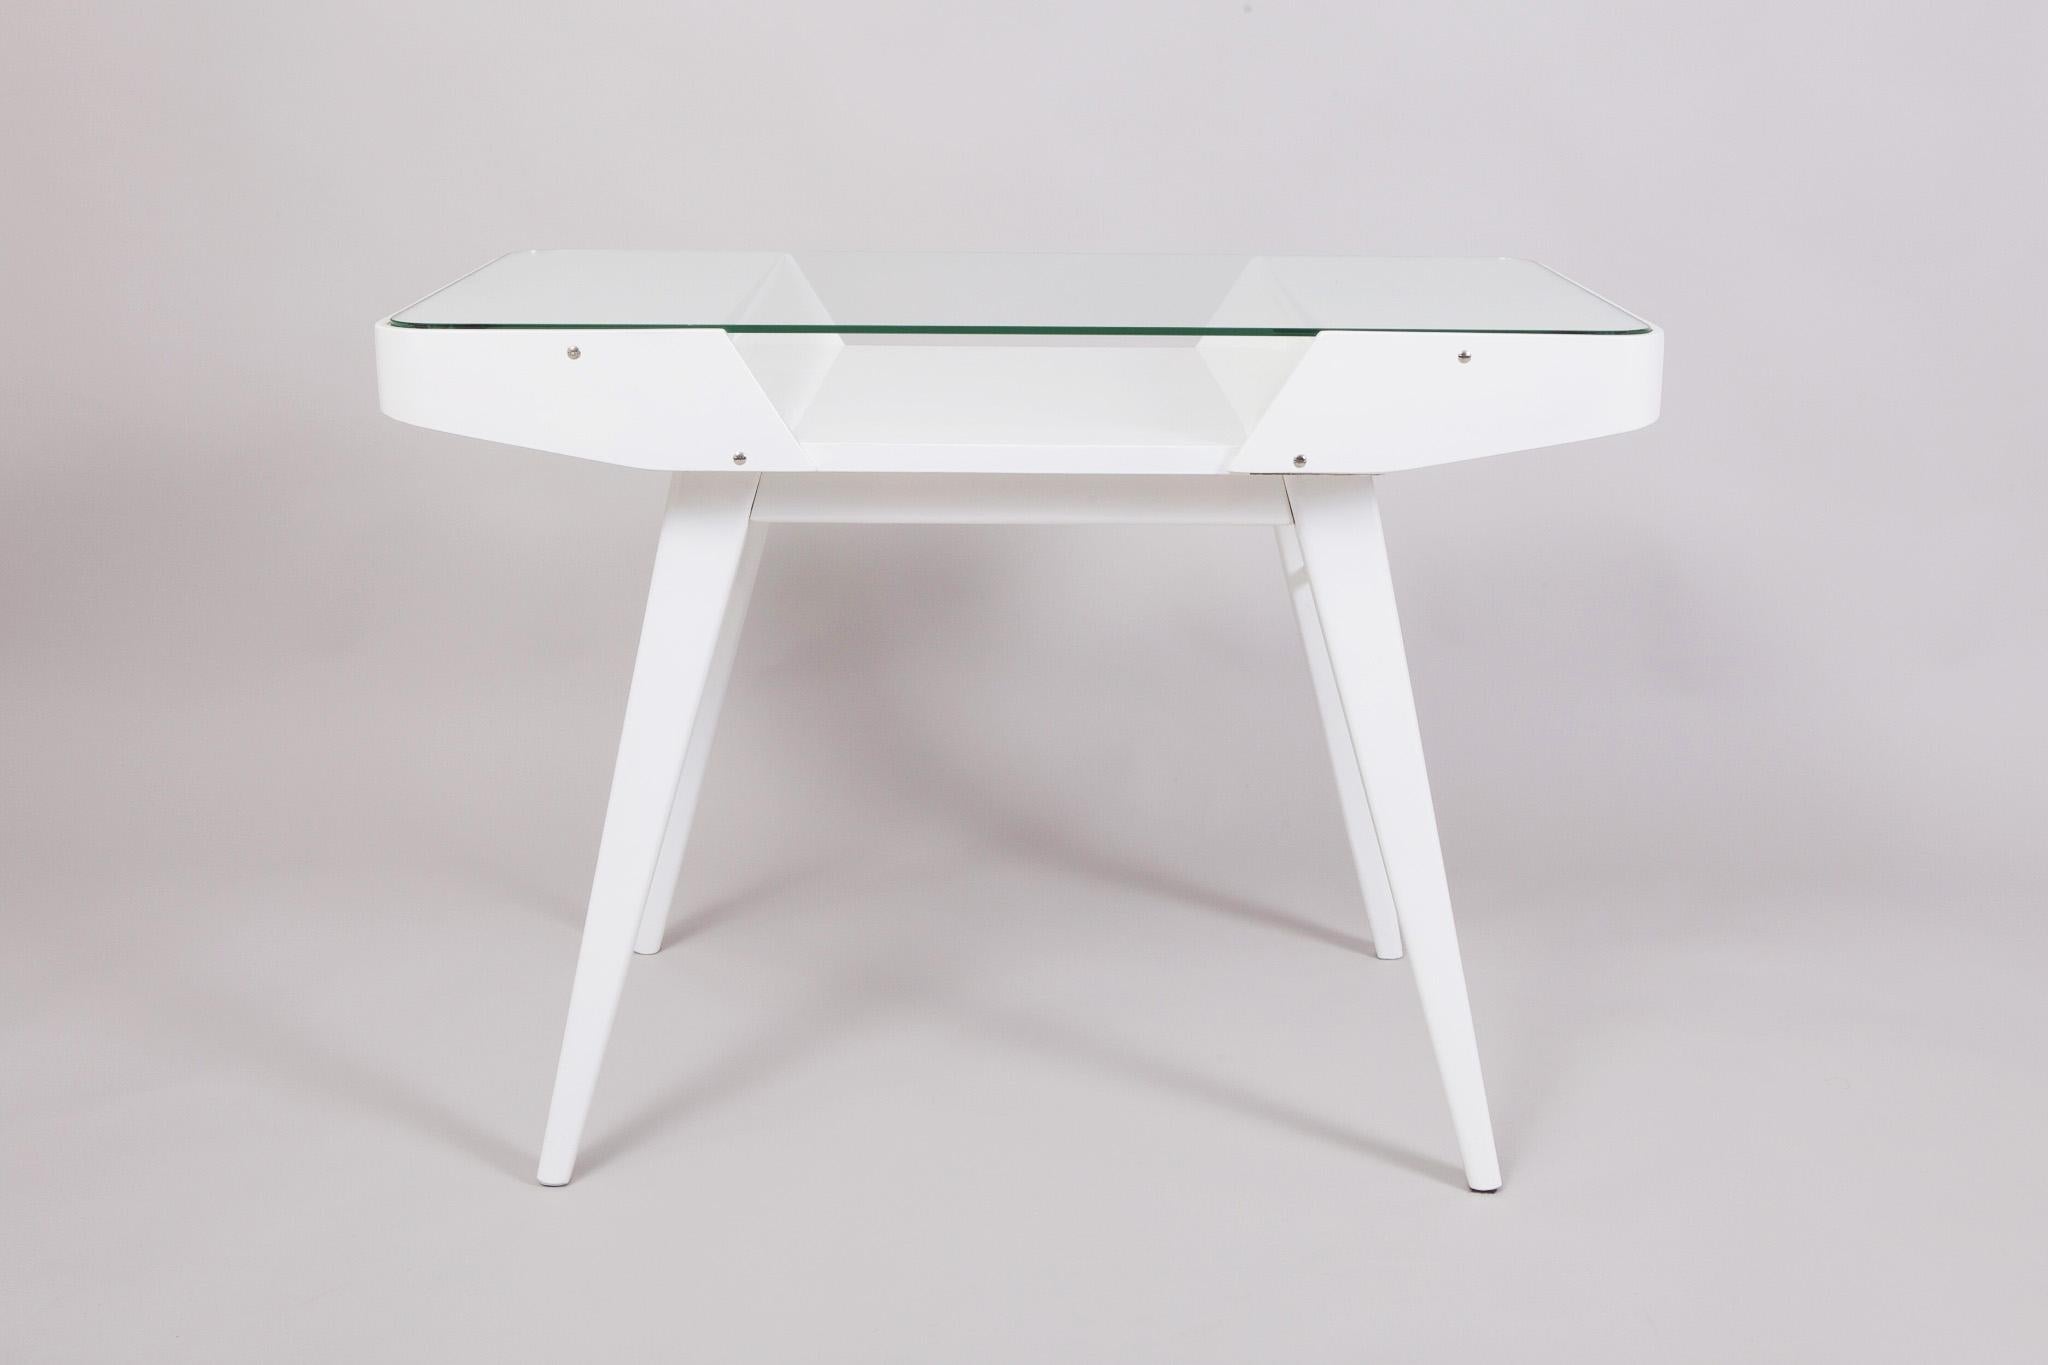 White mid century table made in´50s Czechia. Designed by František Jirák and made by Tatra Nábytok. The table is made out of lacquered wood and glass.